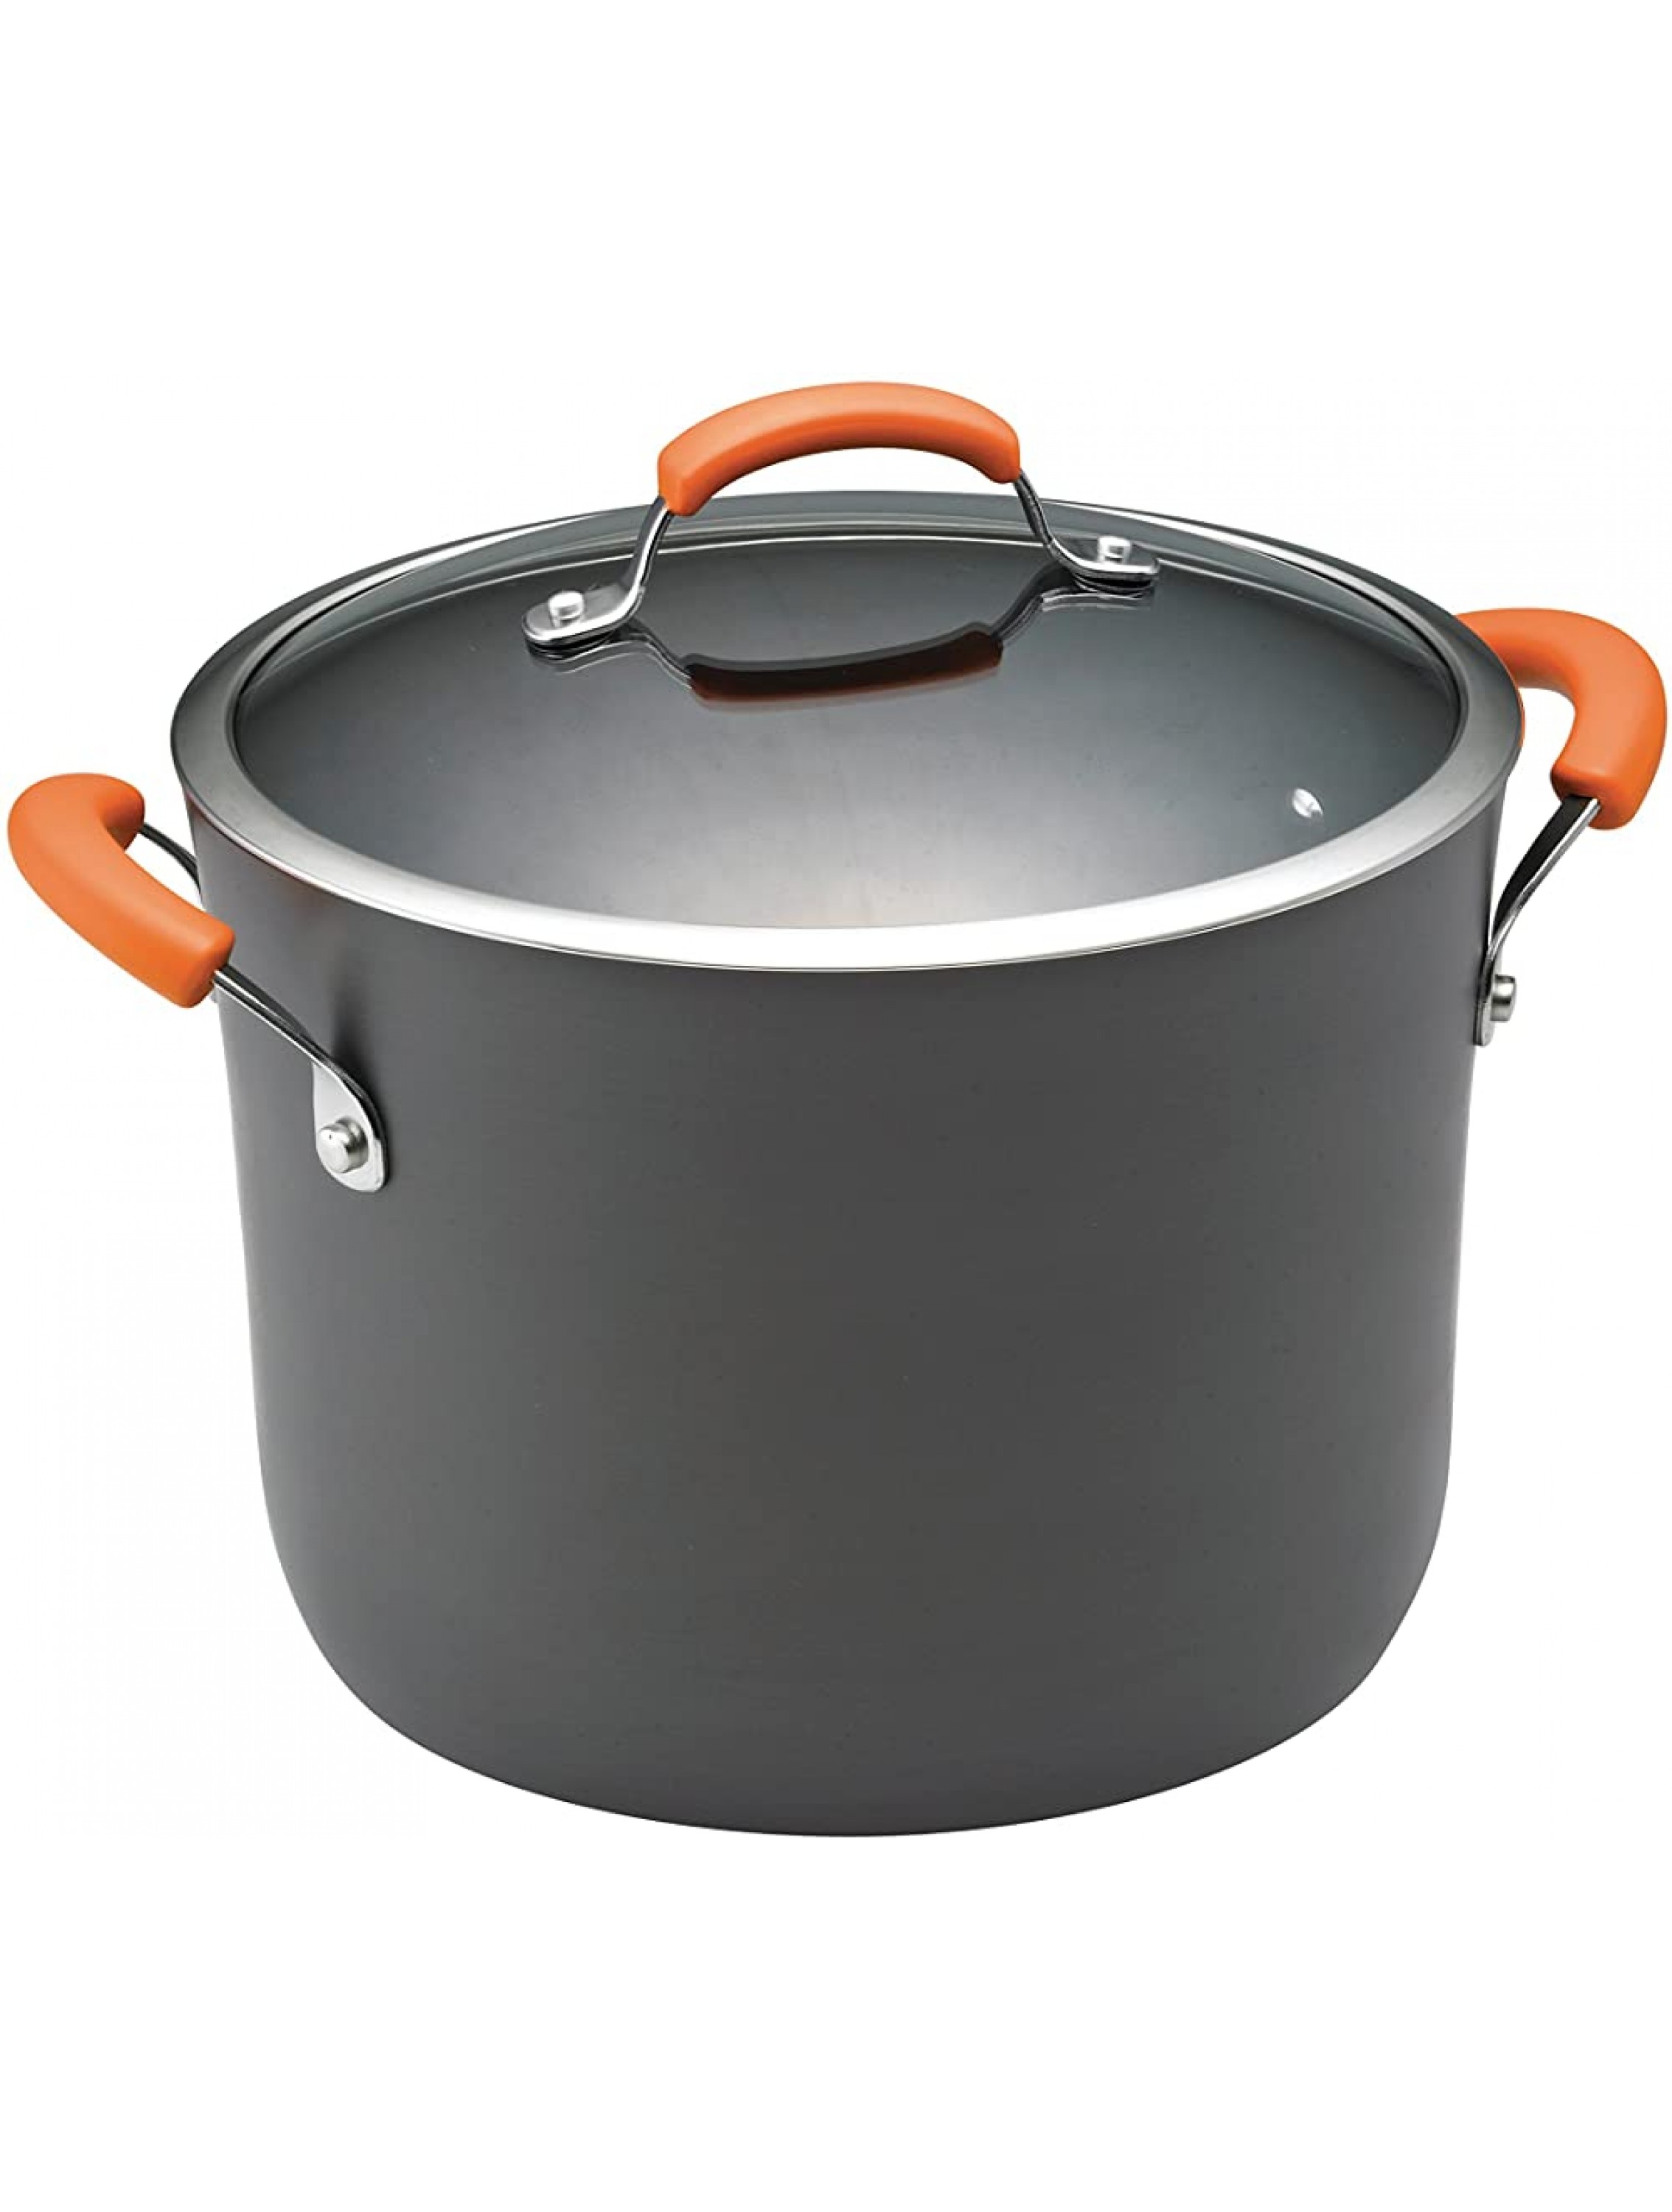 Rachael Ray Brights Hard Anodized Nonstick Stock Pot Stockpot with Lid 10 Quart Gray with Orange Handles - BB0E5GRHX